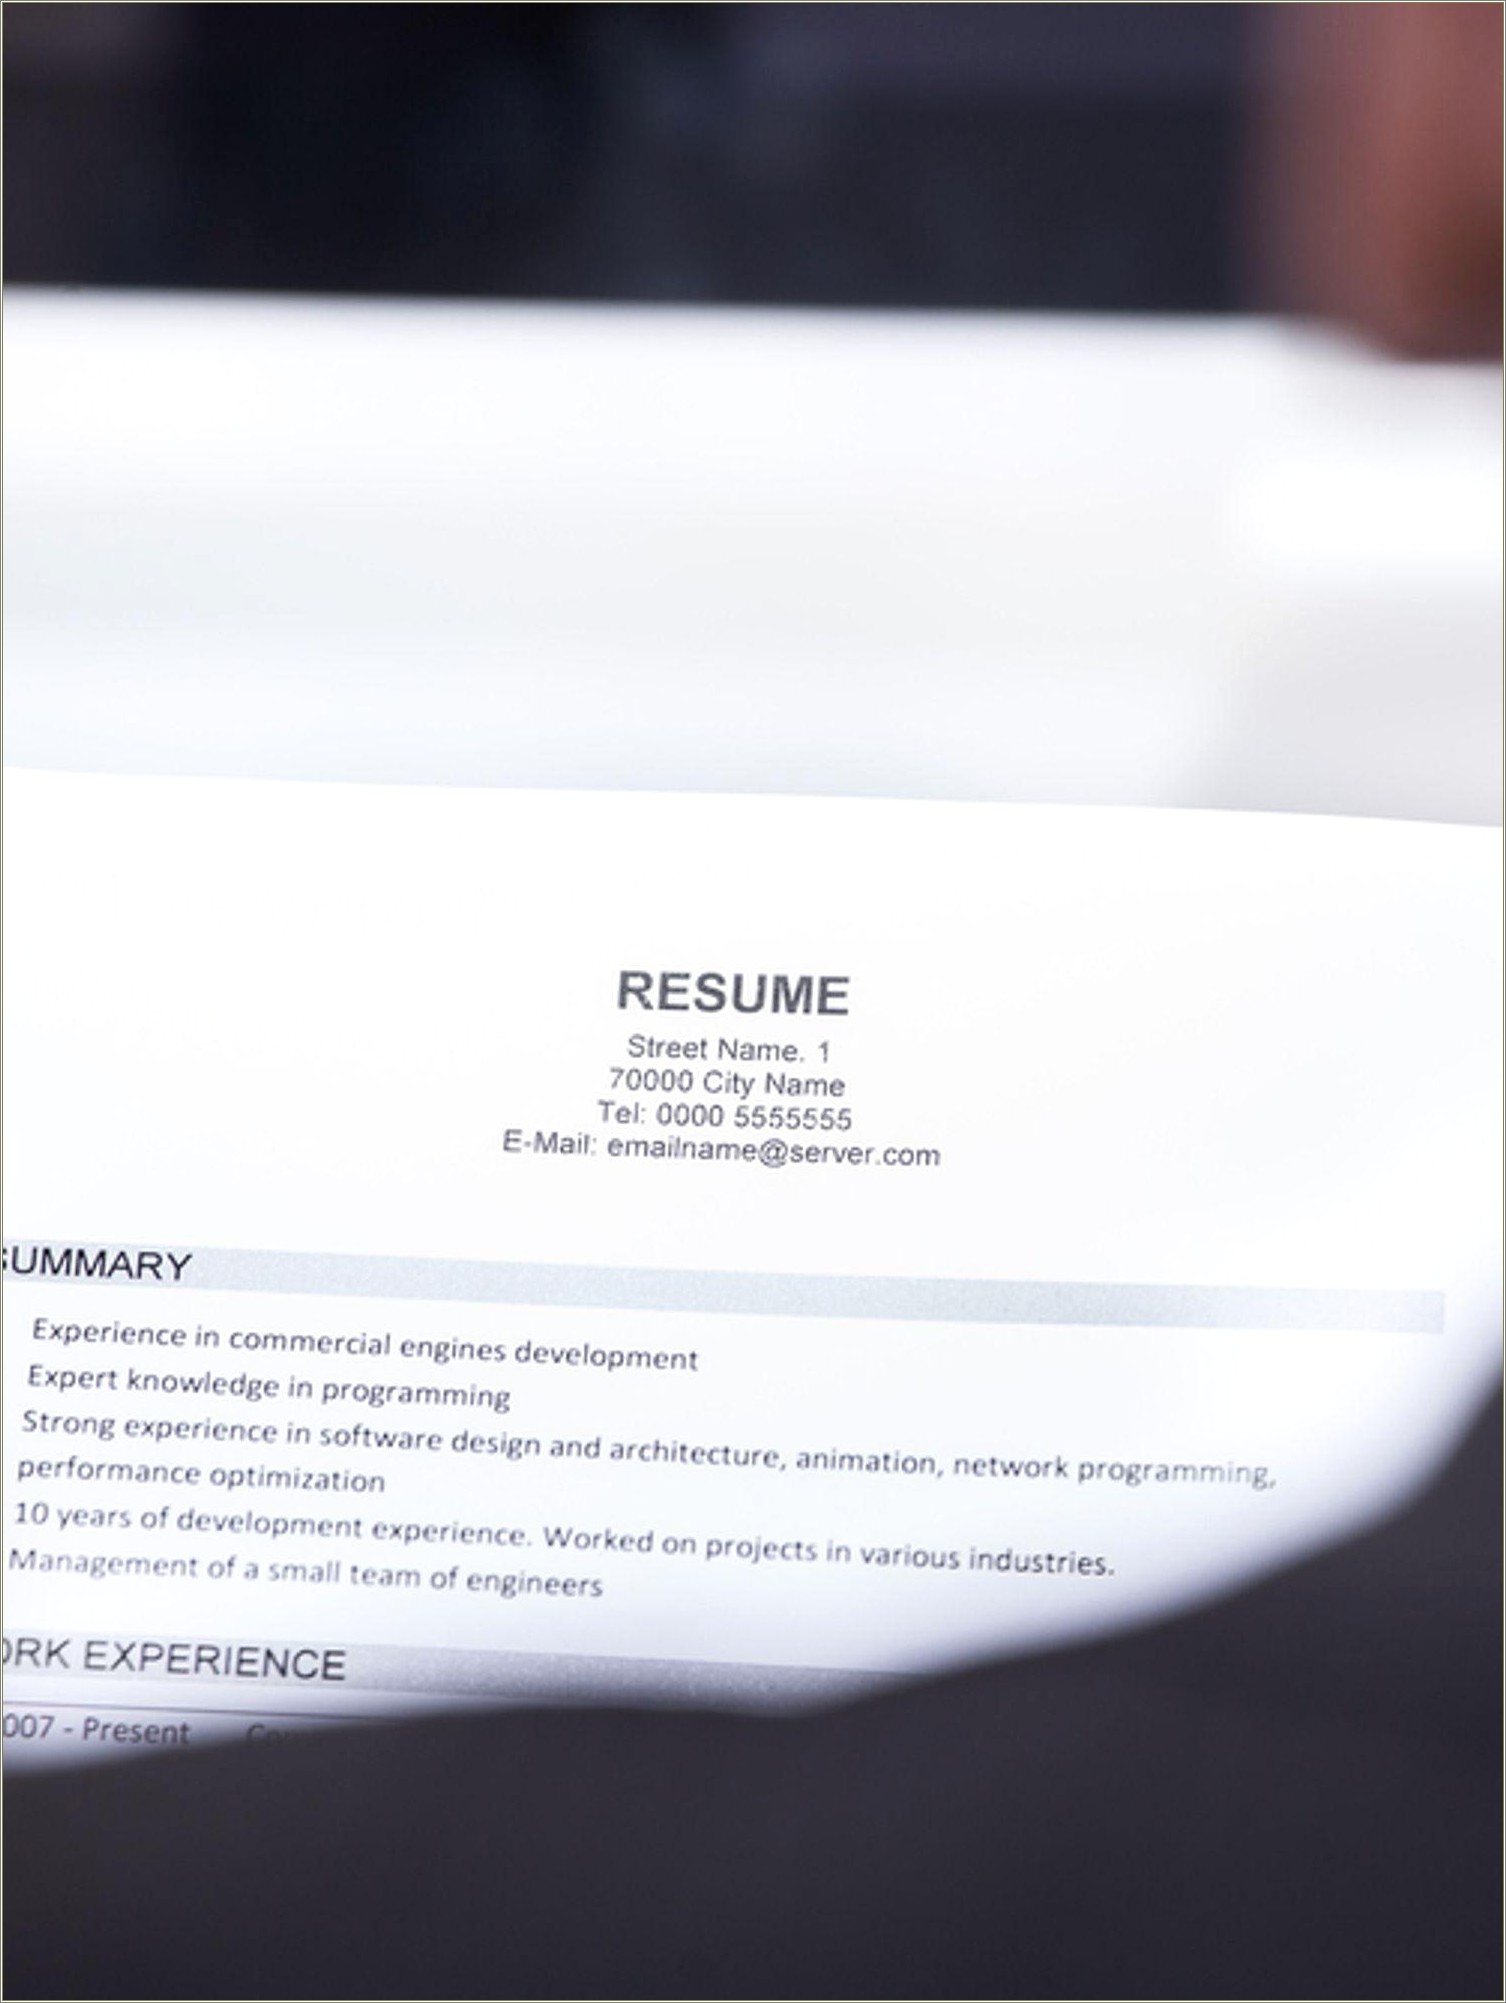 Is A Professional Summary Necessary On A Resume